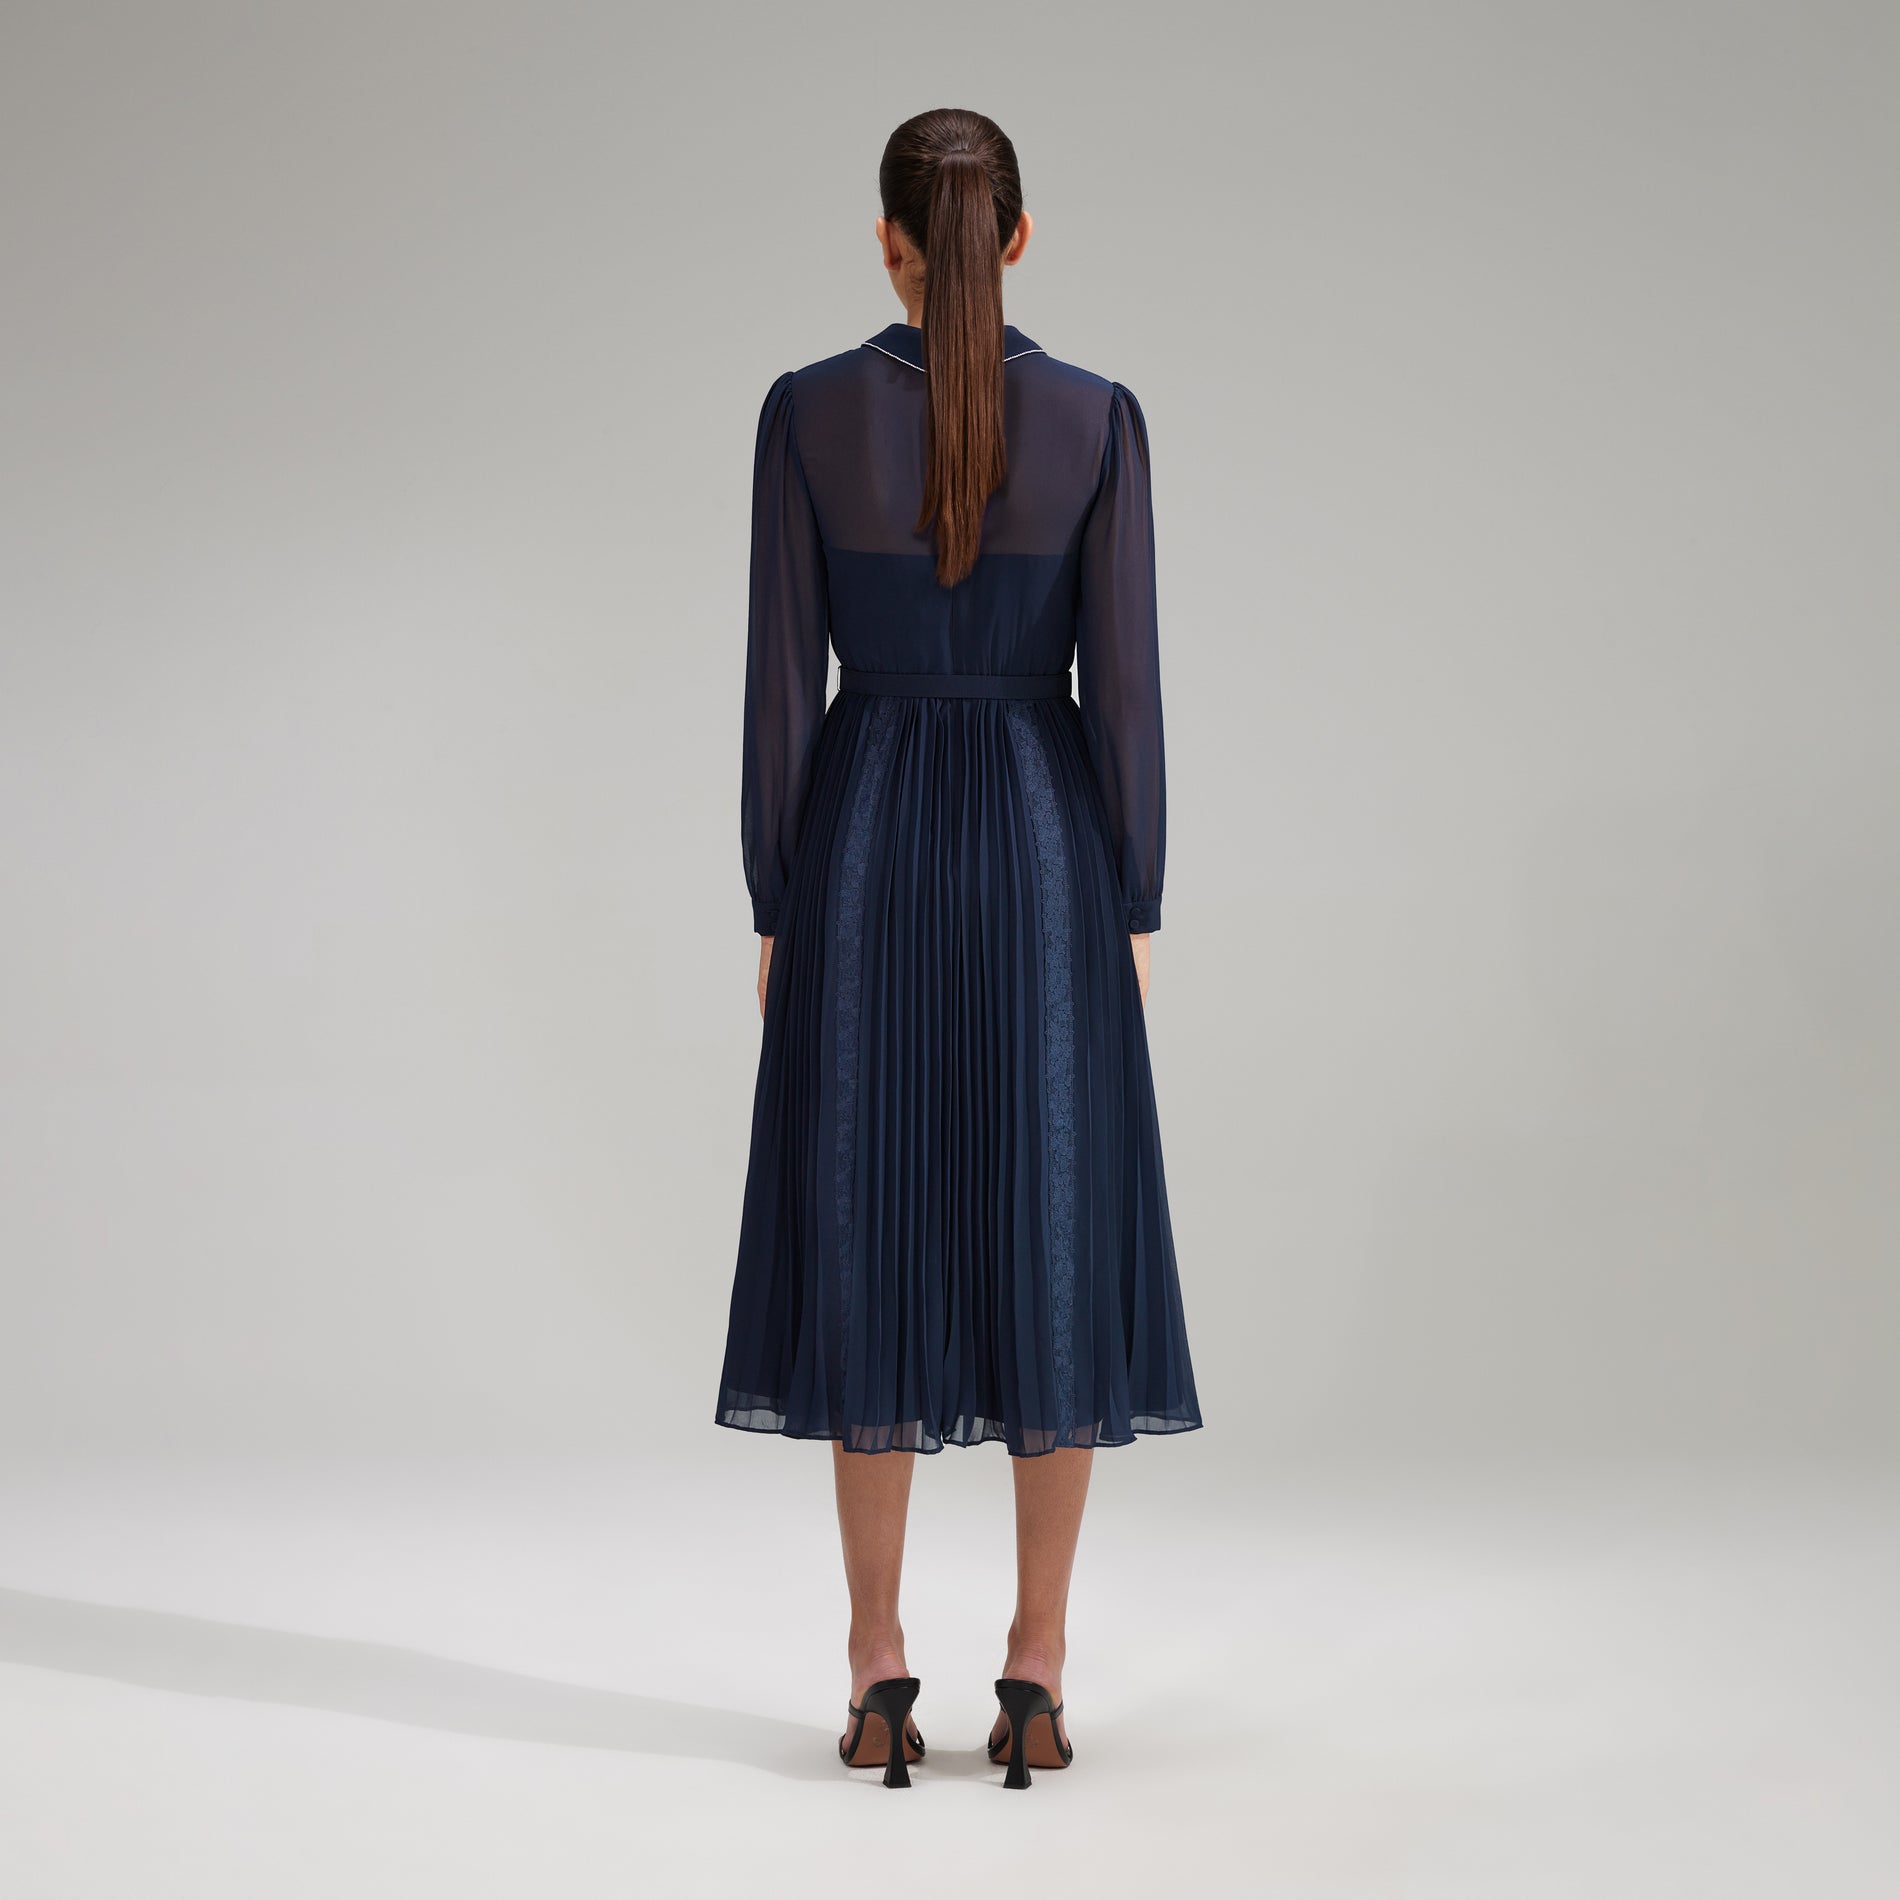 A woman wearing the Navy Pleated Diamante Detail Midi Dress